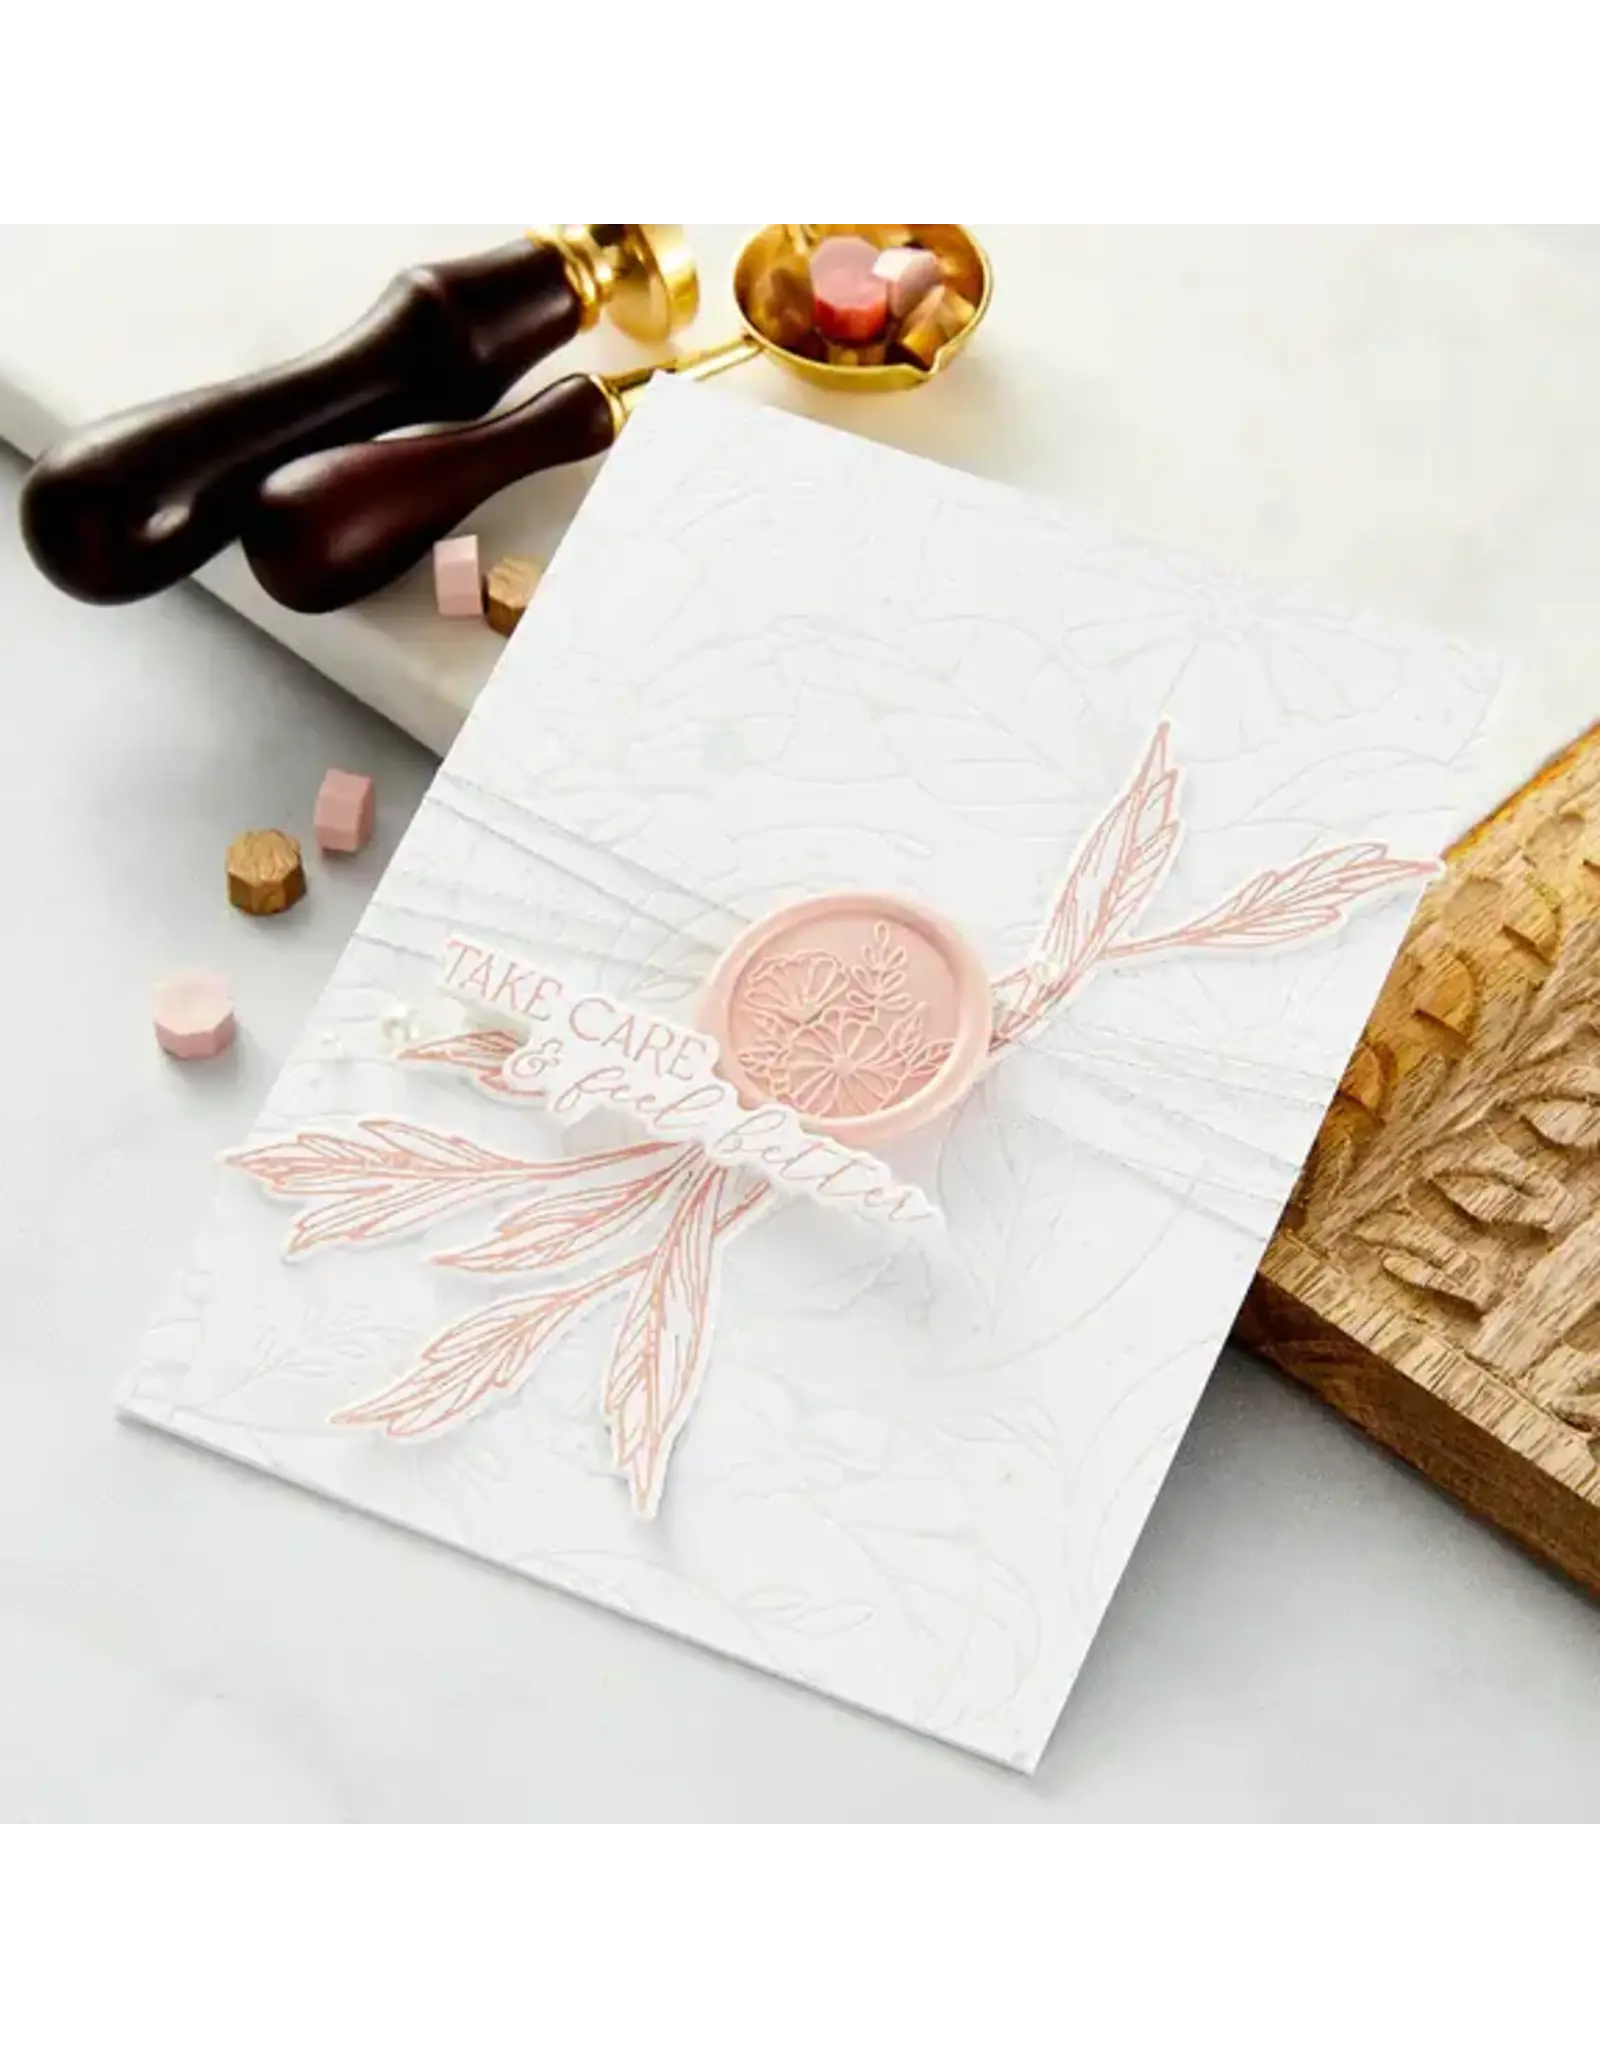 SPELLBINDERS SPELLBINDERS SEALED BY SPELLBINDERS COLLECTION TIMELESS BLOOMS WAX SEAL STAMP